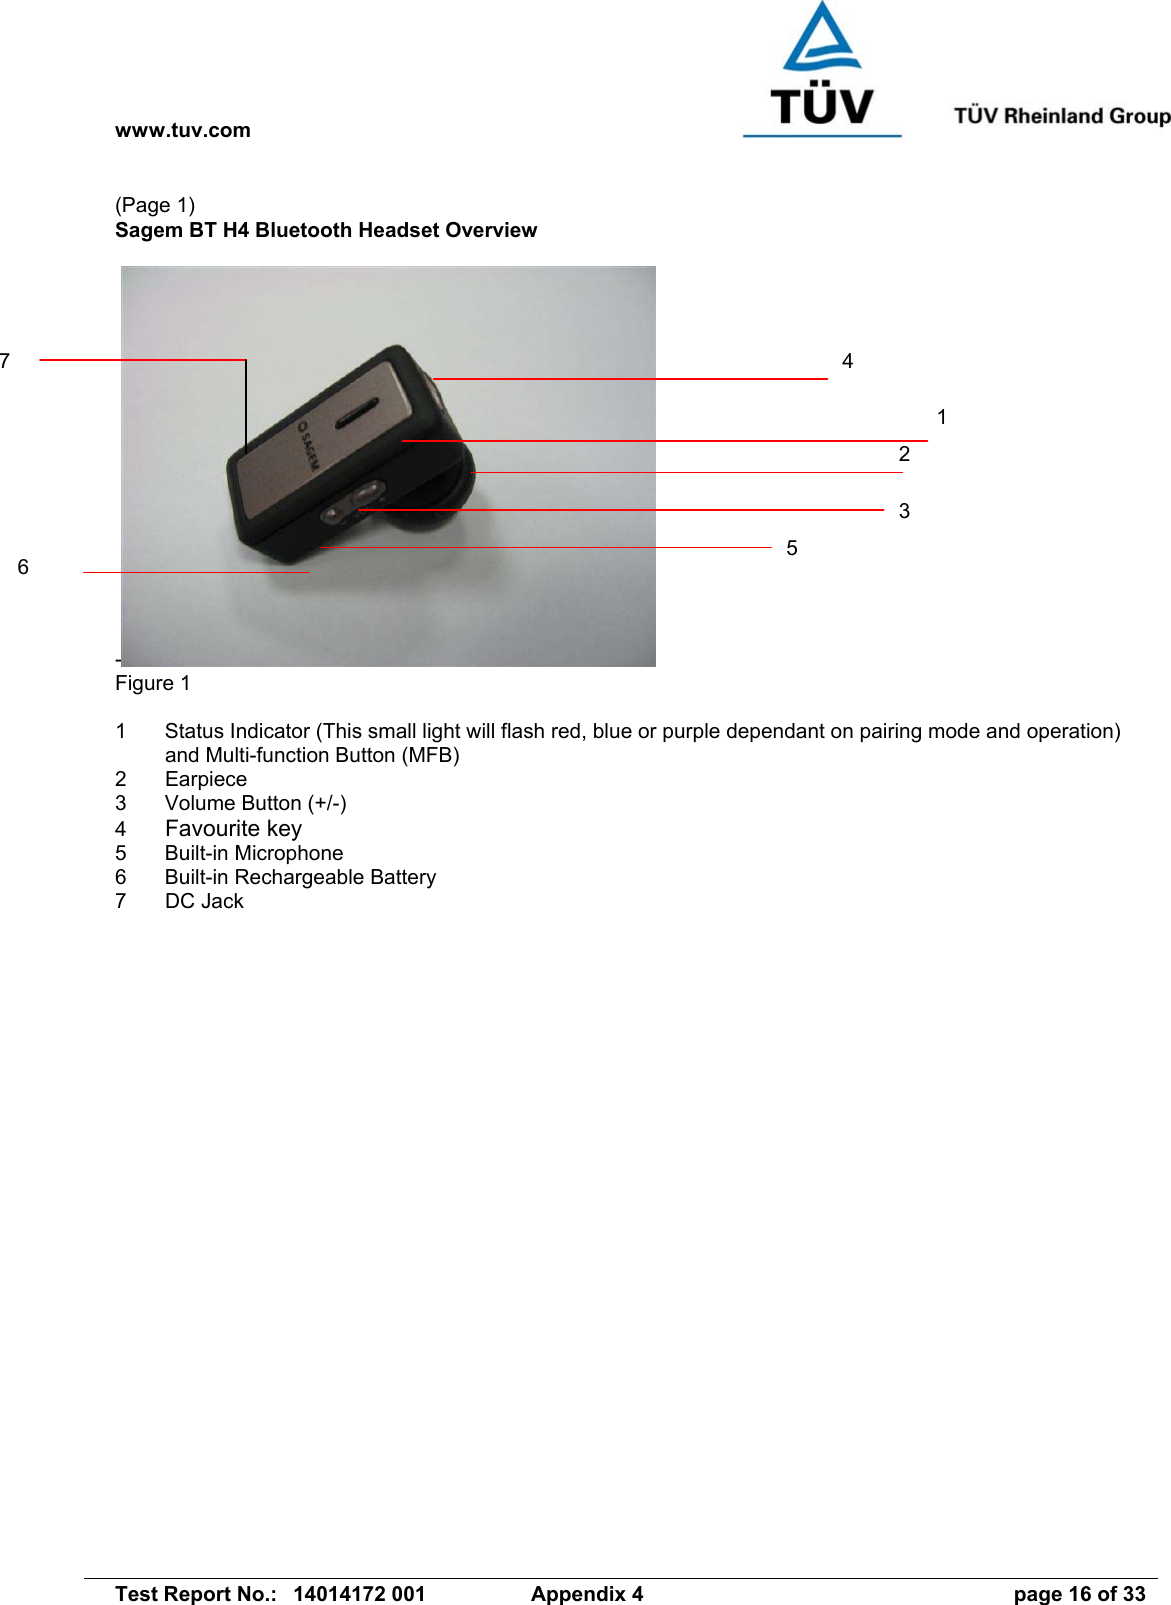 www.tuv.com   Test Report No.:  14014172 001  Appendix 4  page 16 of 33 (Page 1) Sagem BT H4 Bluetooth Headset Overview   - Figure 1  1  Status Indicator (This small light will flash red, blue or purple dependant on pairing mode and operation) and Multi-function Button (MFB) 2 Earpiece 3  Volume Button (+/-) 4  Favourite key   5 Built-in Microphone 6  Built-in Rechargeable Battery 7  DC Jack   1 2 3 5 4 6 7 